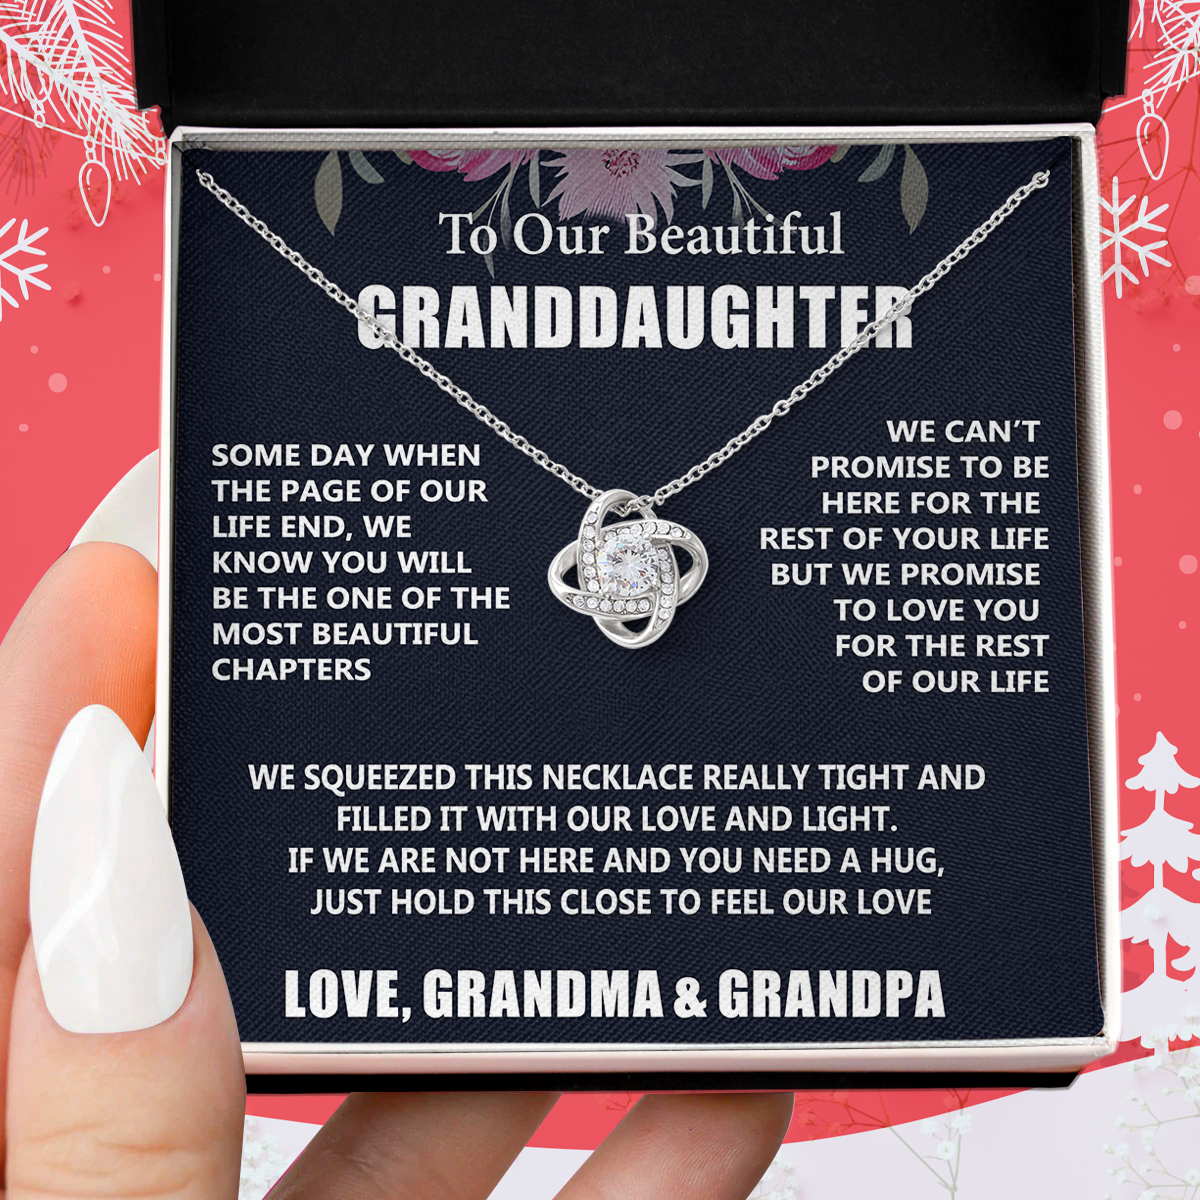 To My Granddaughter Necklace, To Our Granddaughter Necklace B0BLK6Z3SF B0BN1WWM1J B0BLTXY3P4